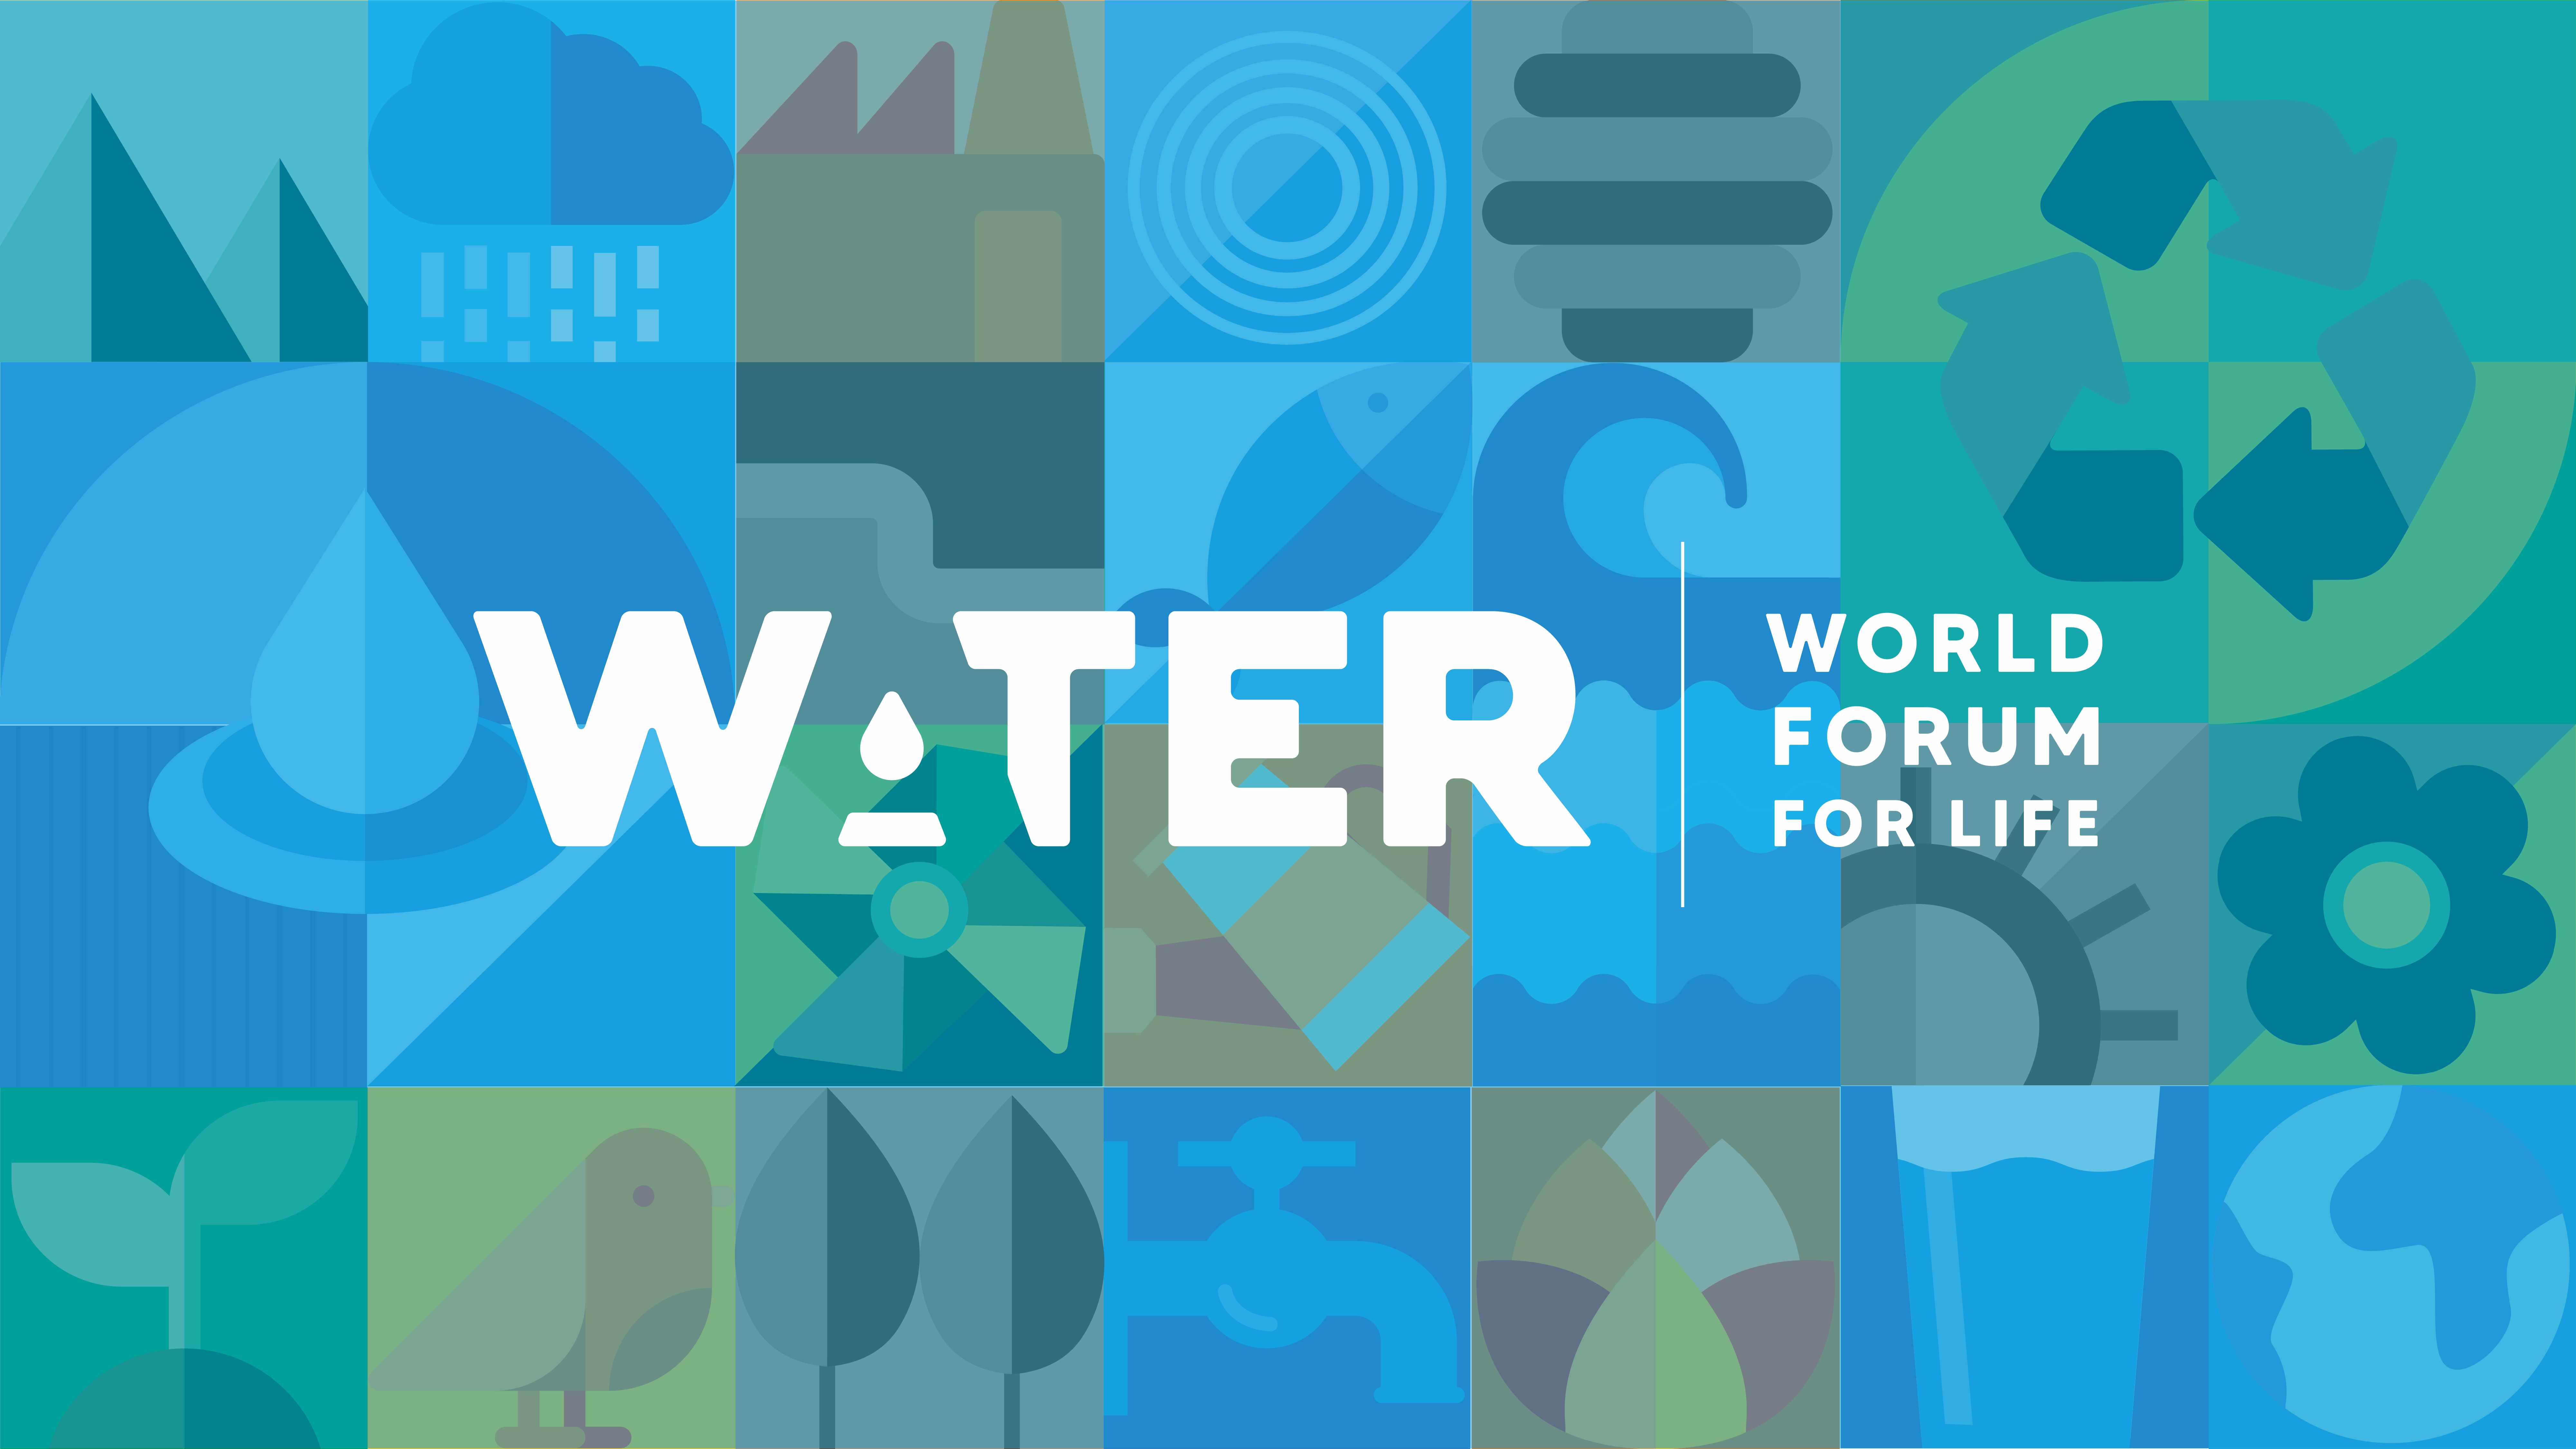 WATER – World Forum for Life